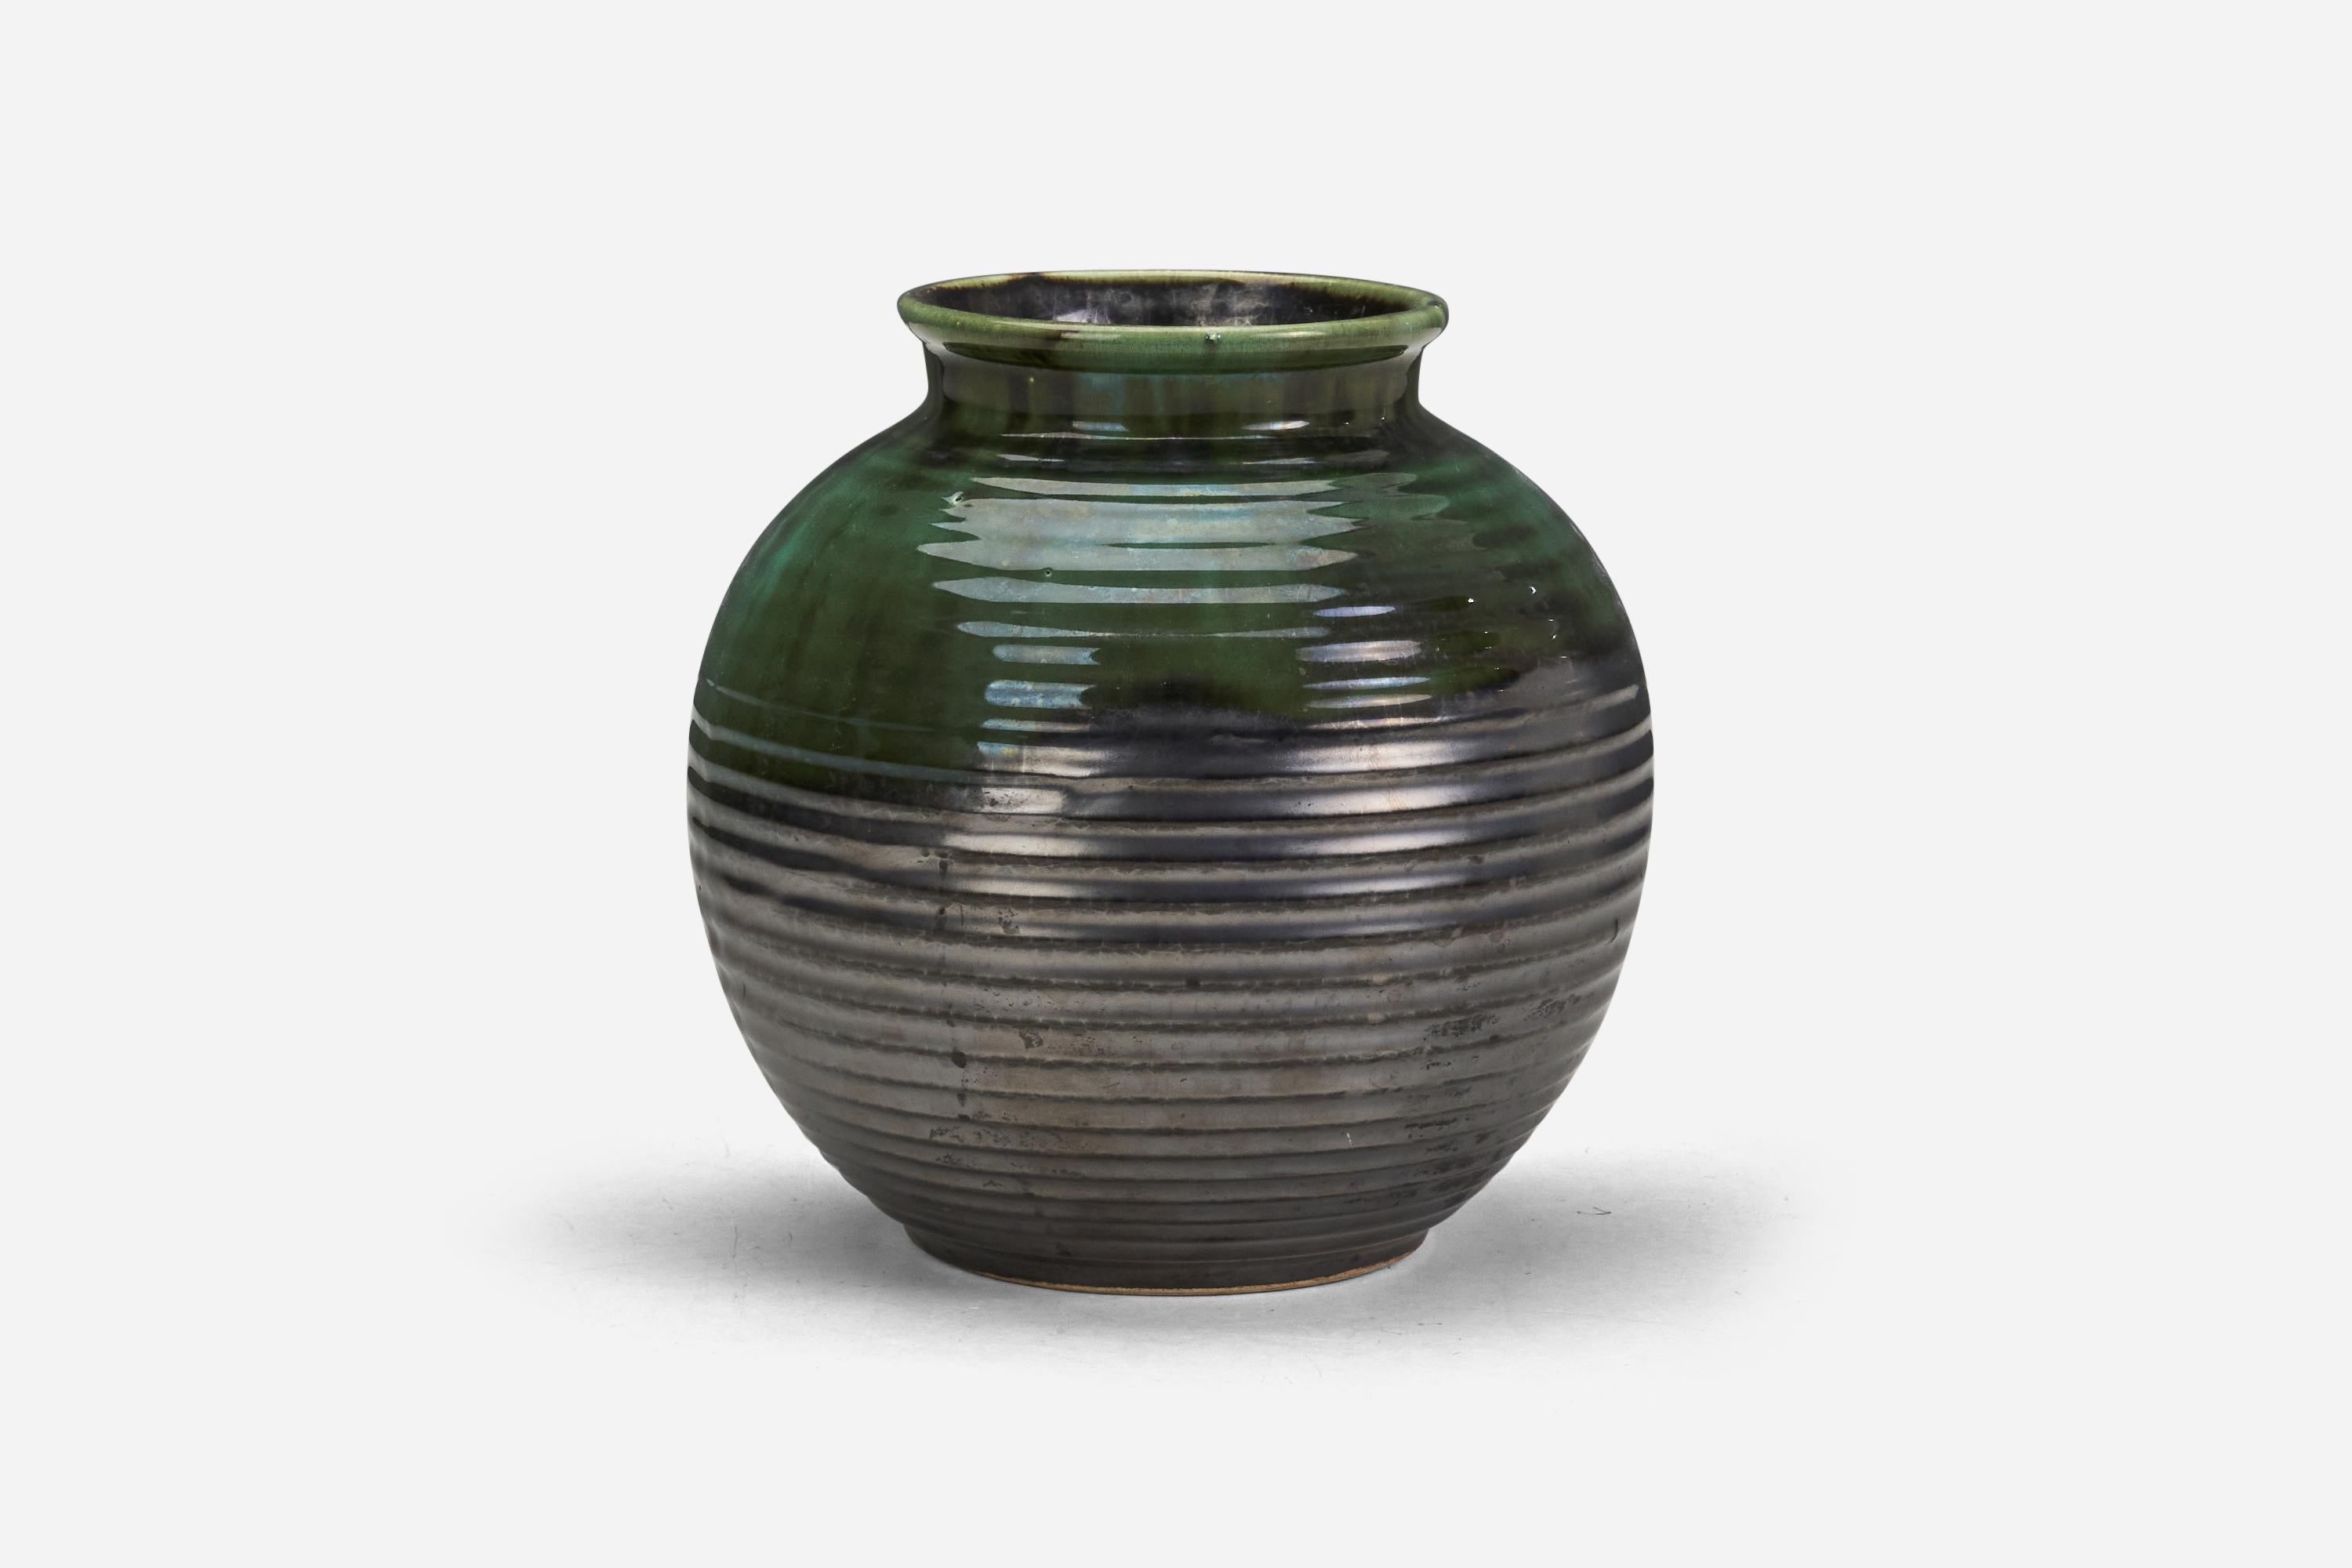 A green and grey glazed earthenware vase; design and production attributed to Upsala-Ekeby, Sweden, 1940s.